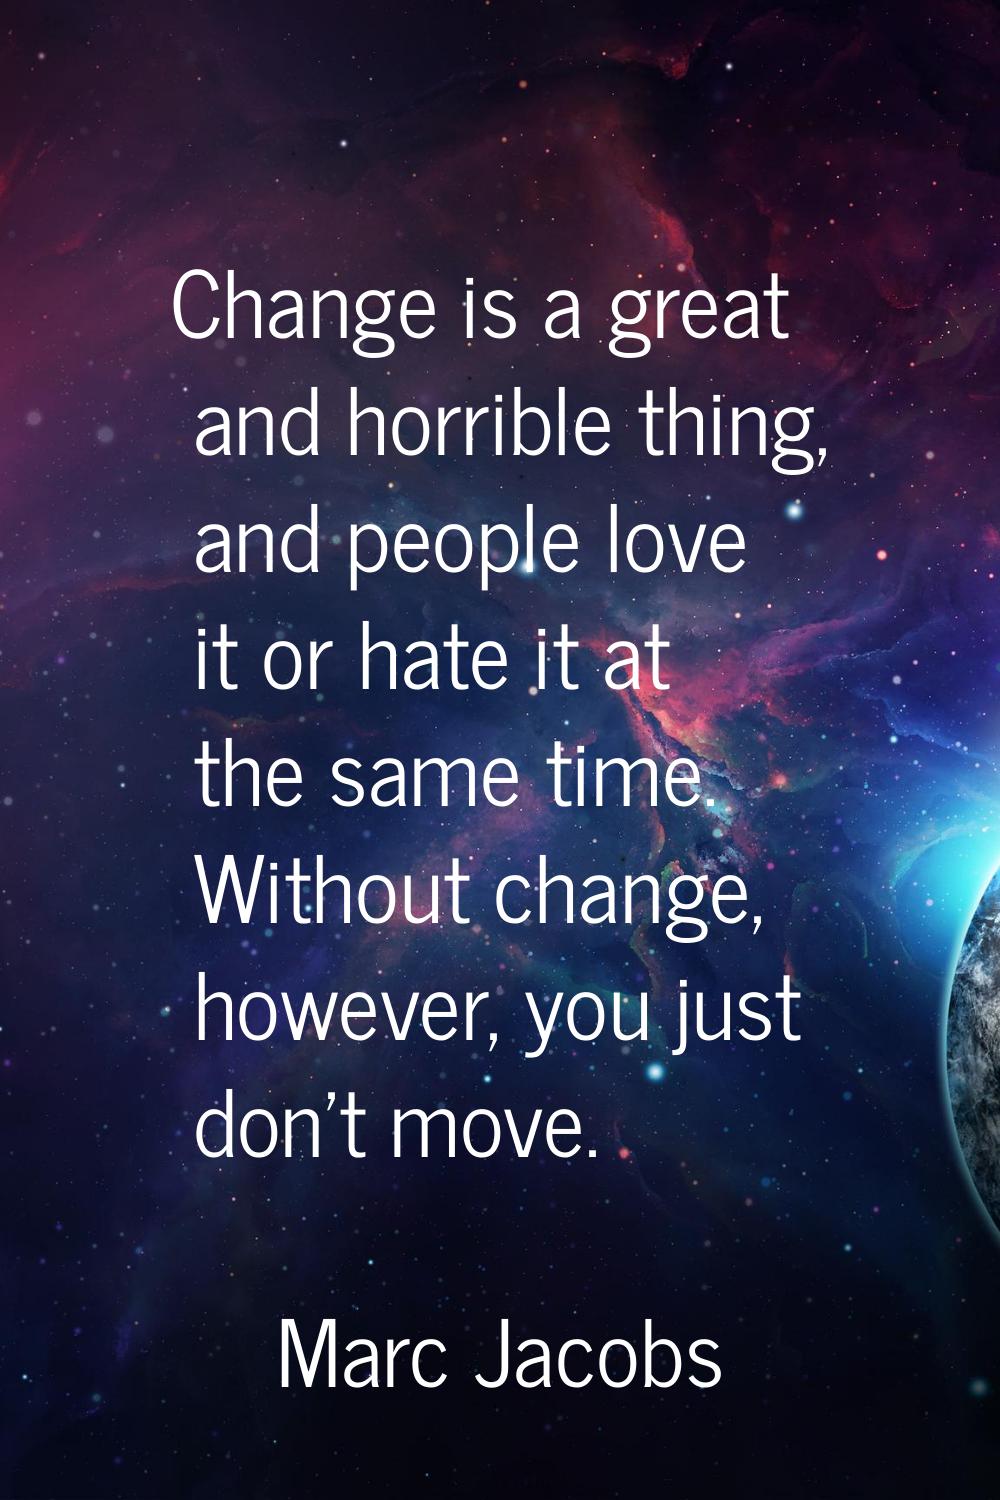 Change is a great and horrible thing, and people love it or hate it at the same time. Without chang